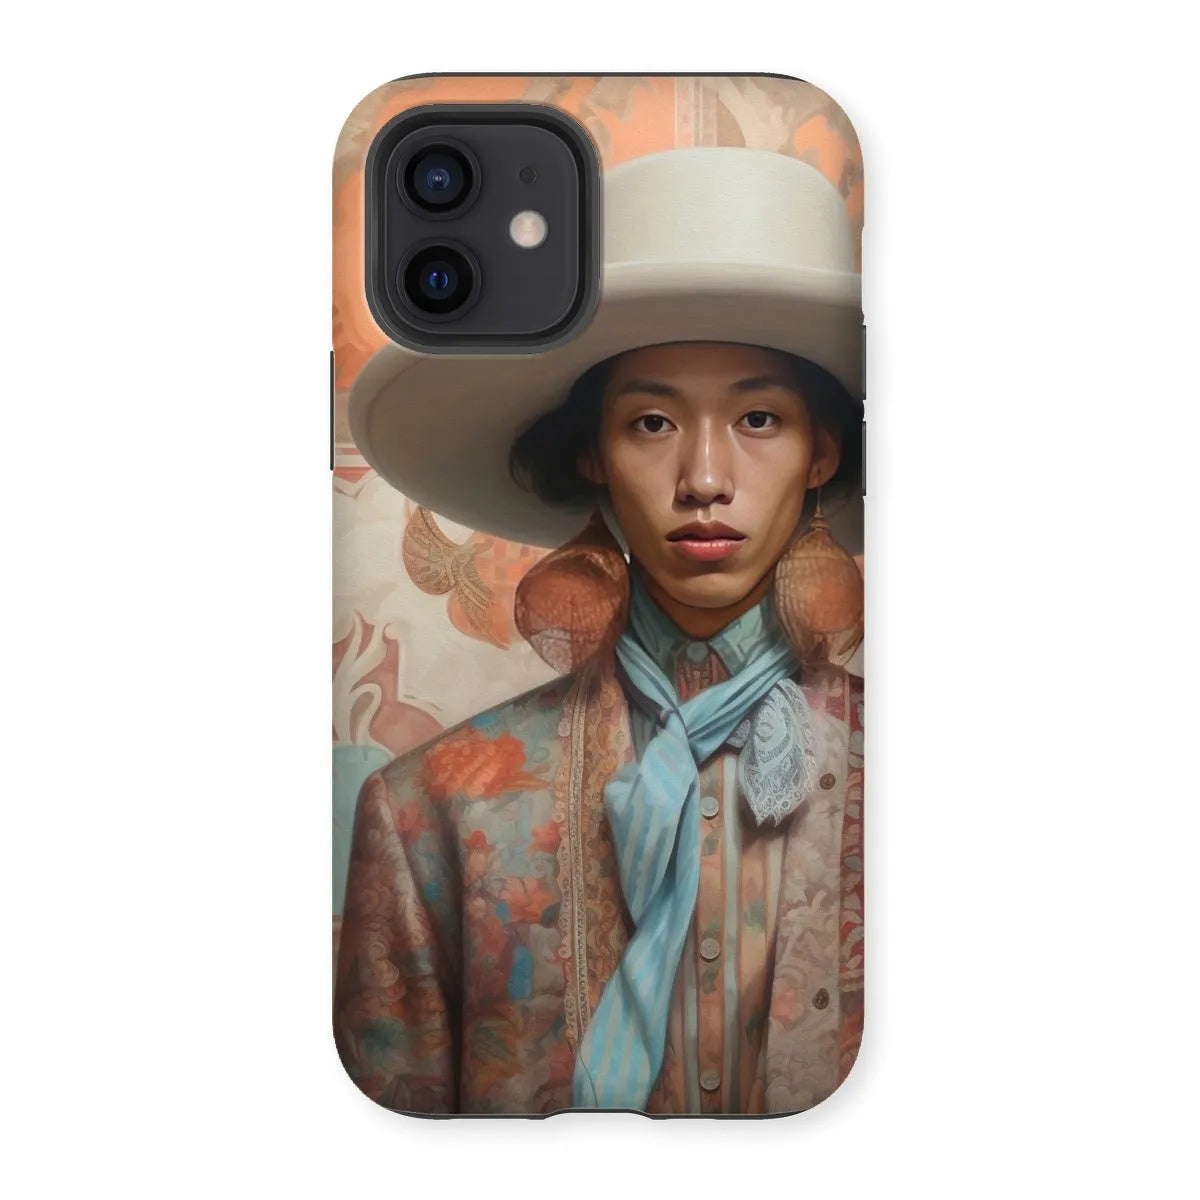 Iyaan The Gay Cowboy - Dandy Gay Aesthetic Art Phone Case - Iphone 12 / Matte - Mobile Phone Cases - Aesthetic Art